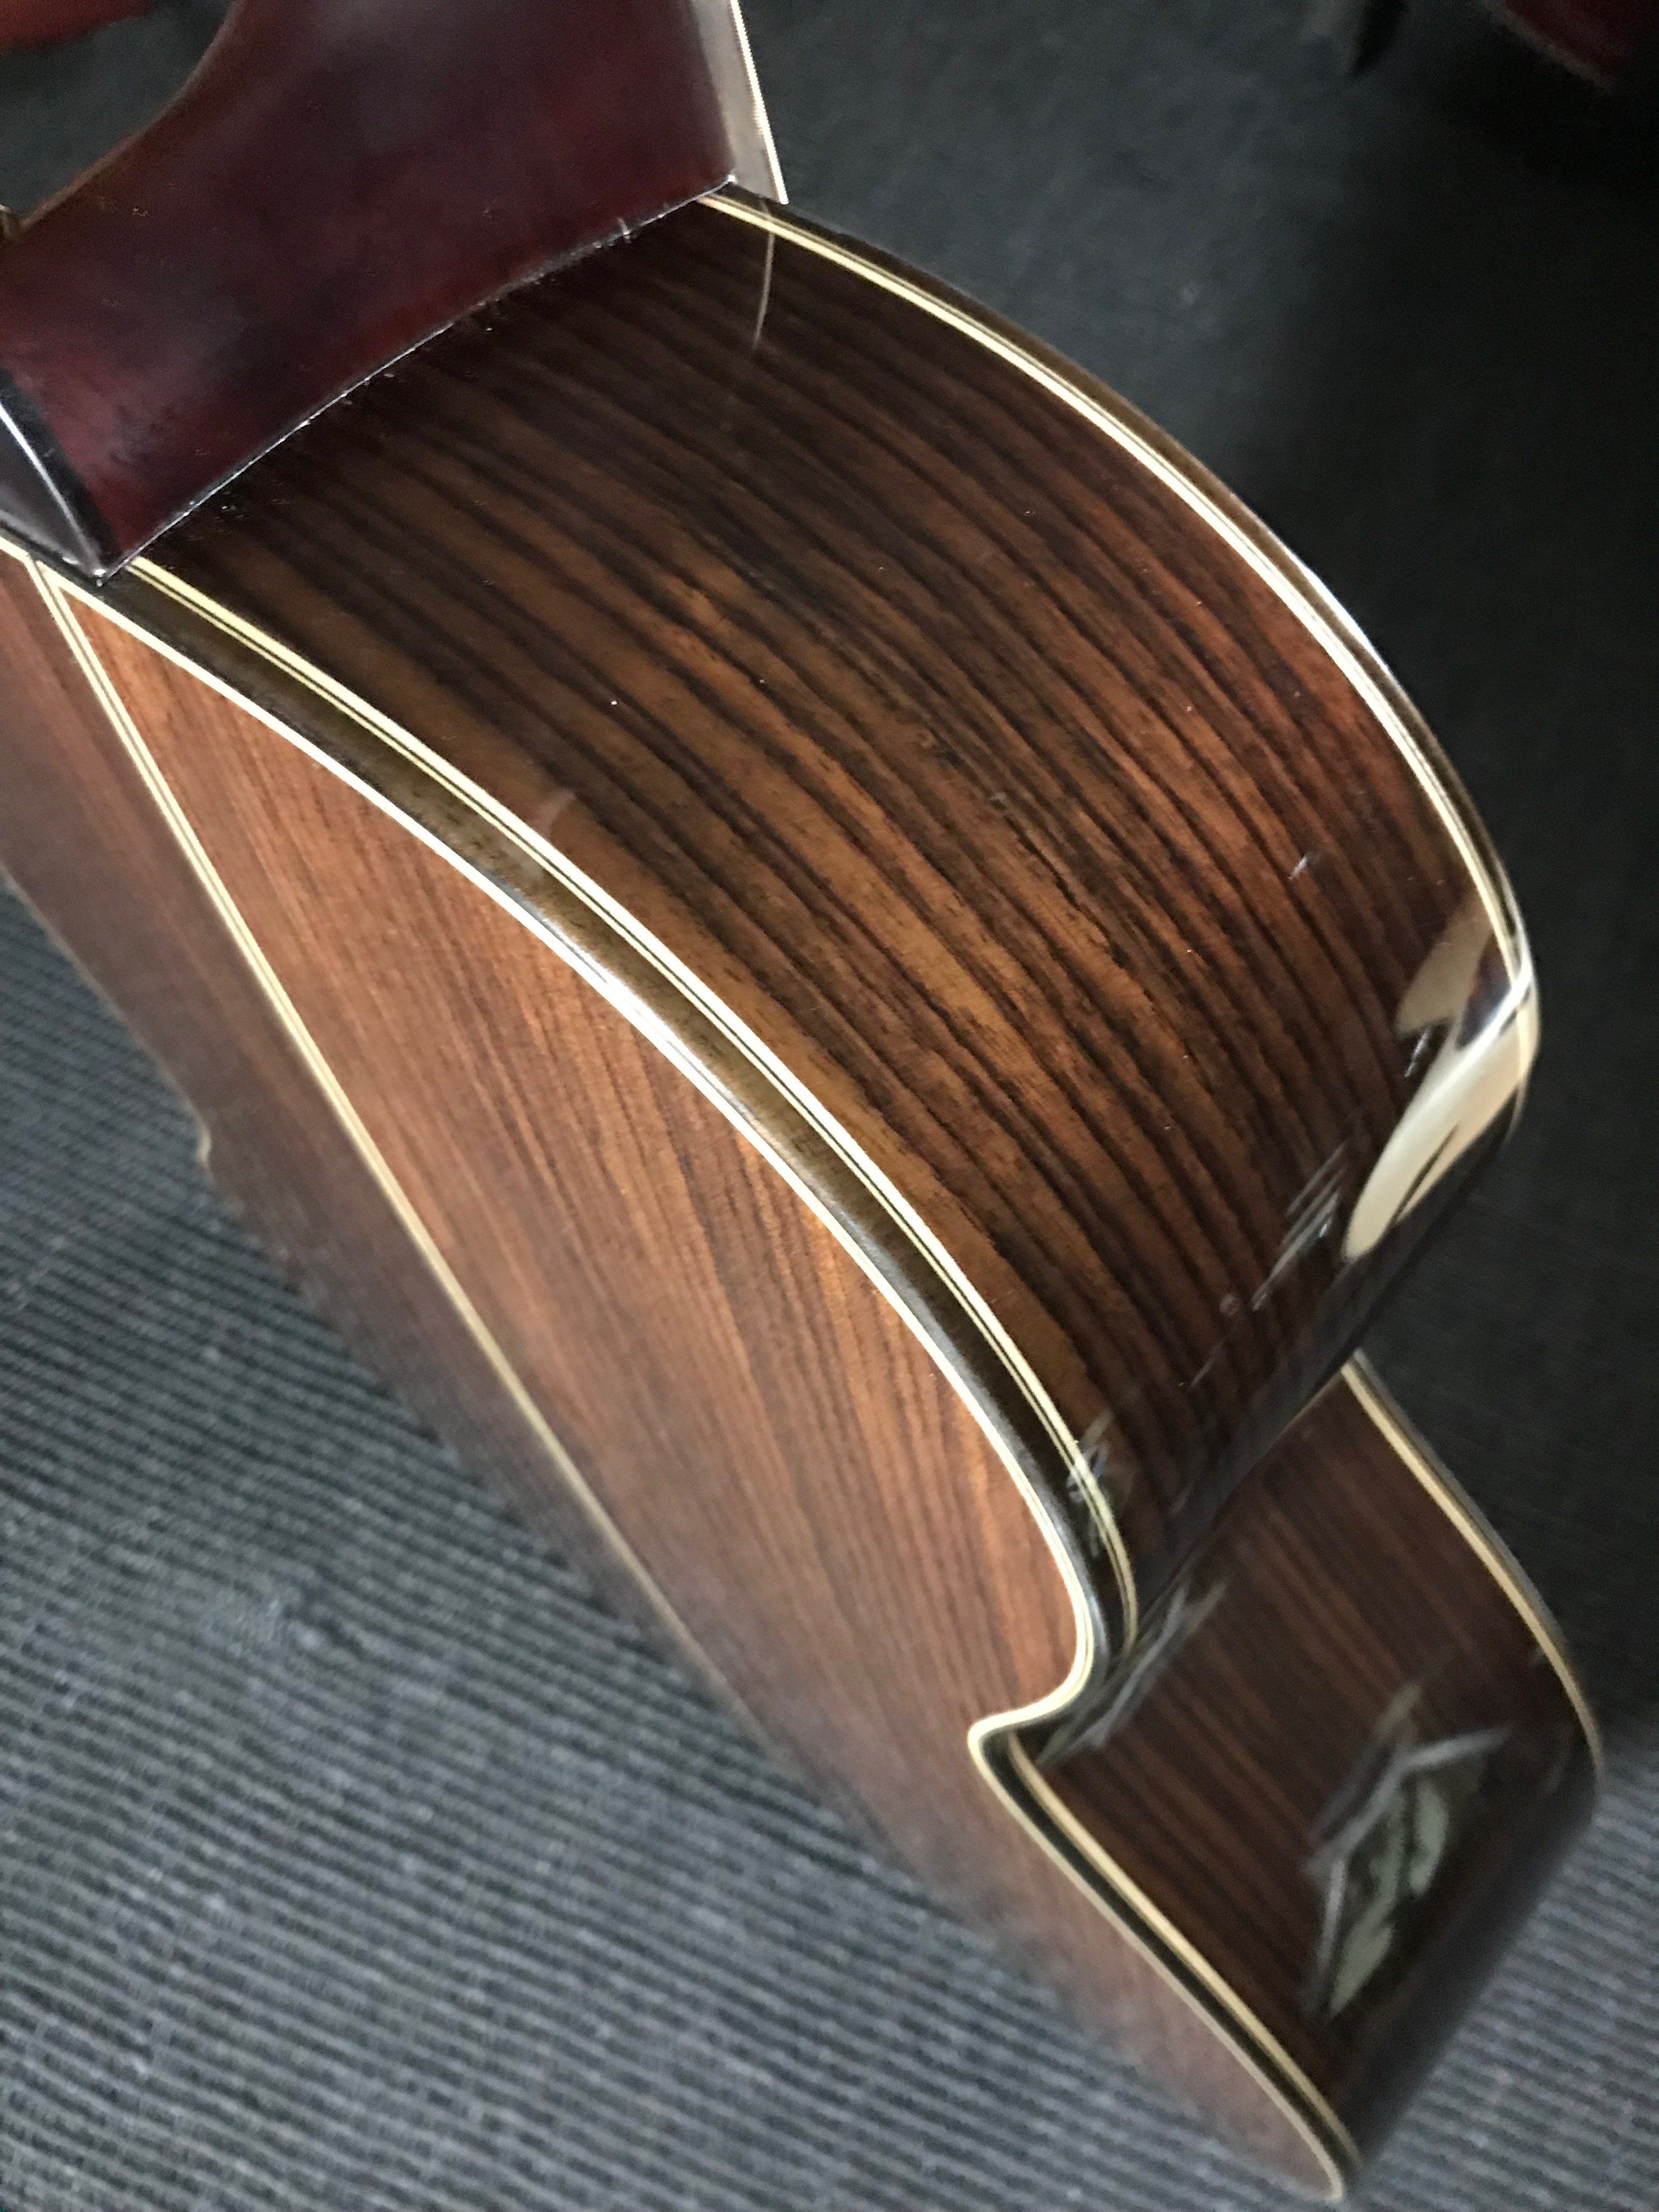 Auden Chester Rosewood Series Fully Body Cedar Top Electro Acoustic Guitar, Electro Acoustic Guitar for sale at Richards Guitars.